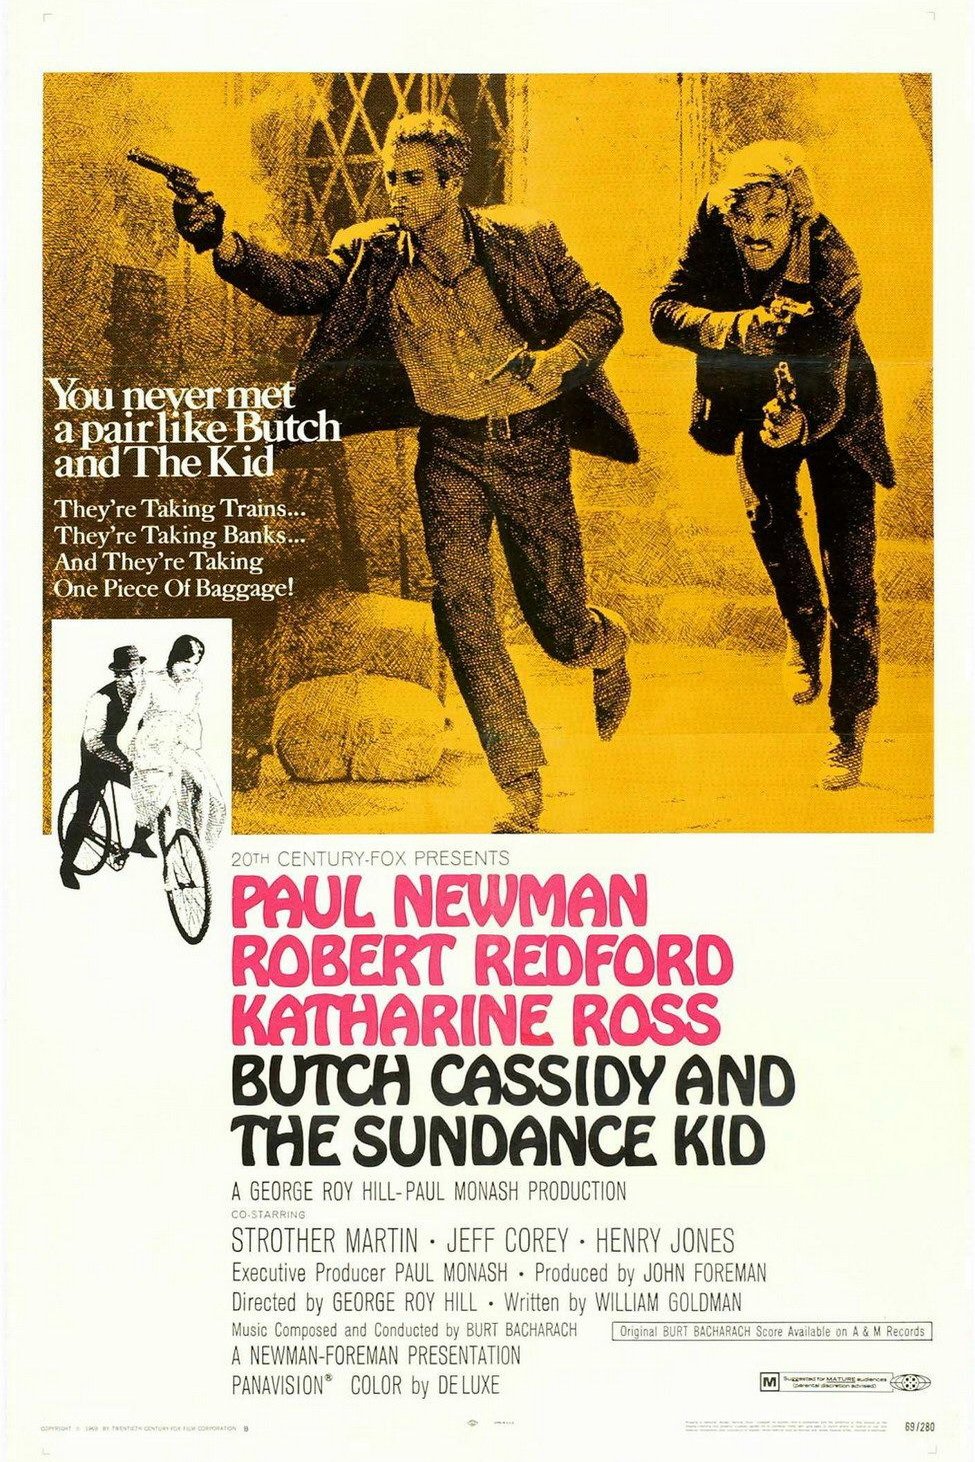 L'affiche du film Butch Cassidy and the Sundance Kid